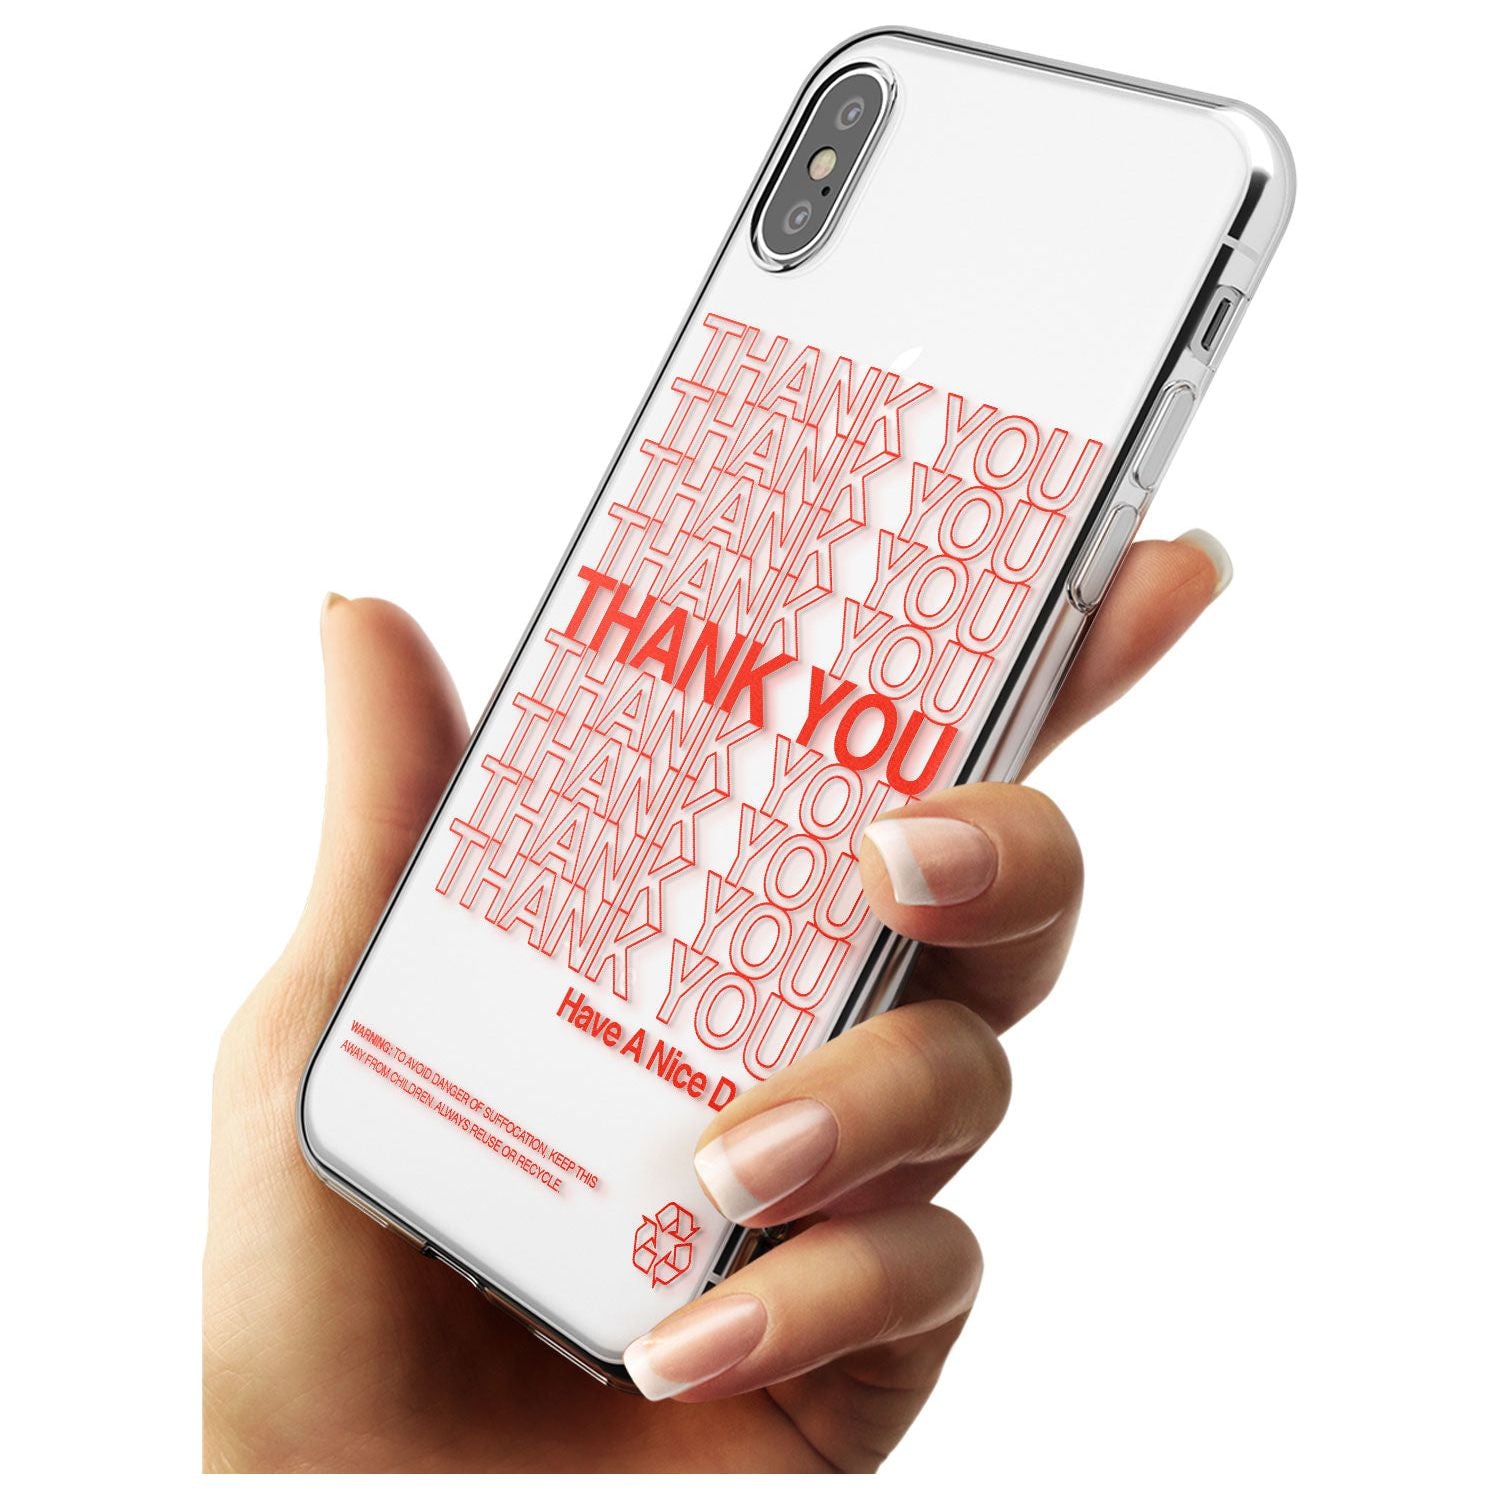 Classic Thank You Bag Design: Solid White + Red Slim TPU Phone Case Warehouse X XS Max XR